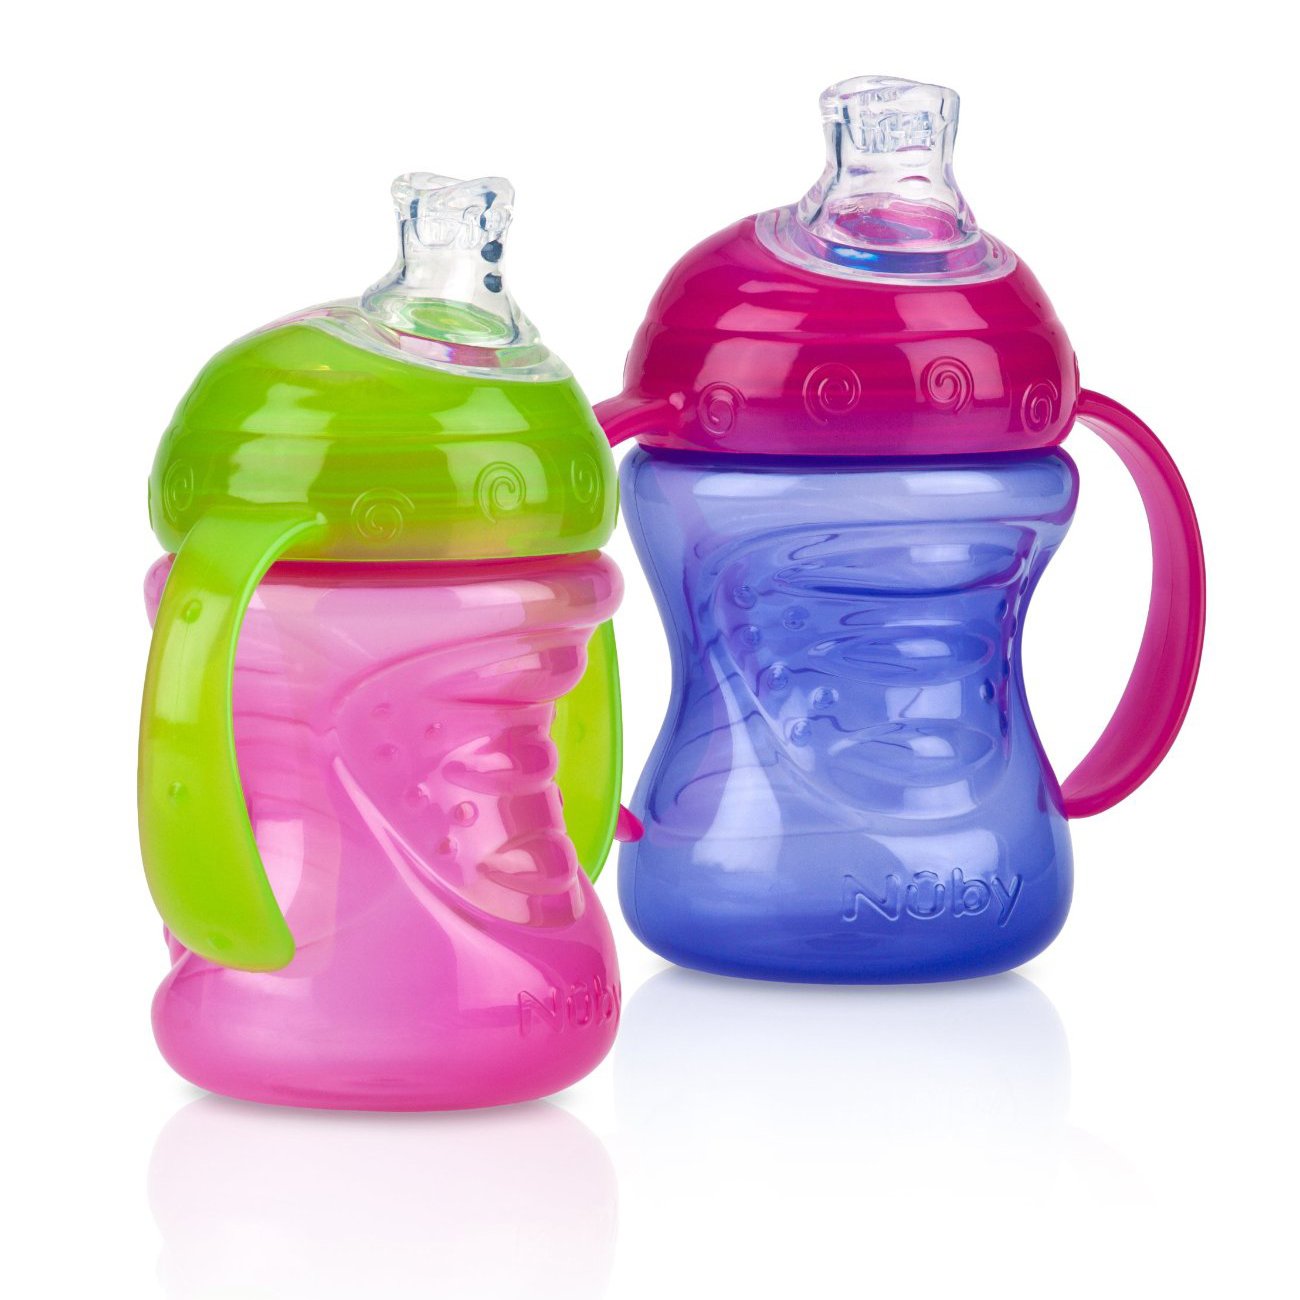 Nuby 2 Count 2 Handle Cup with No Spill Super Spout